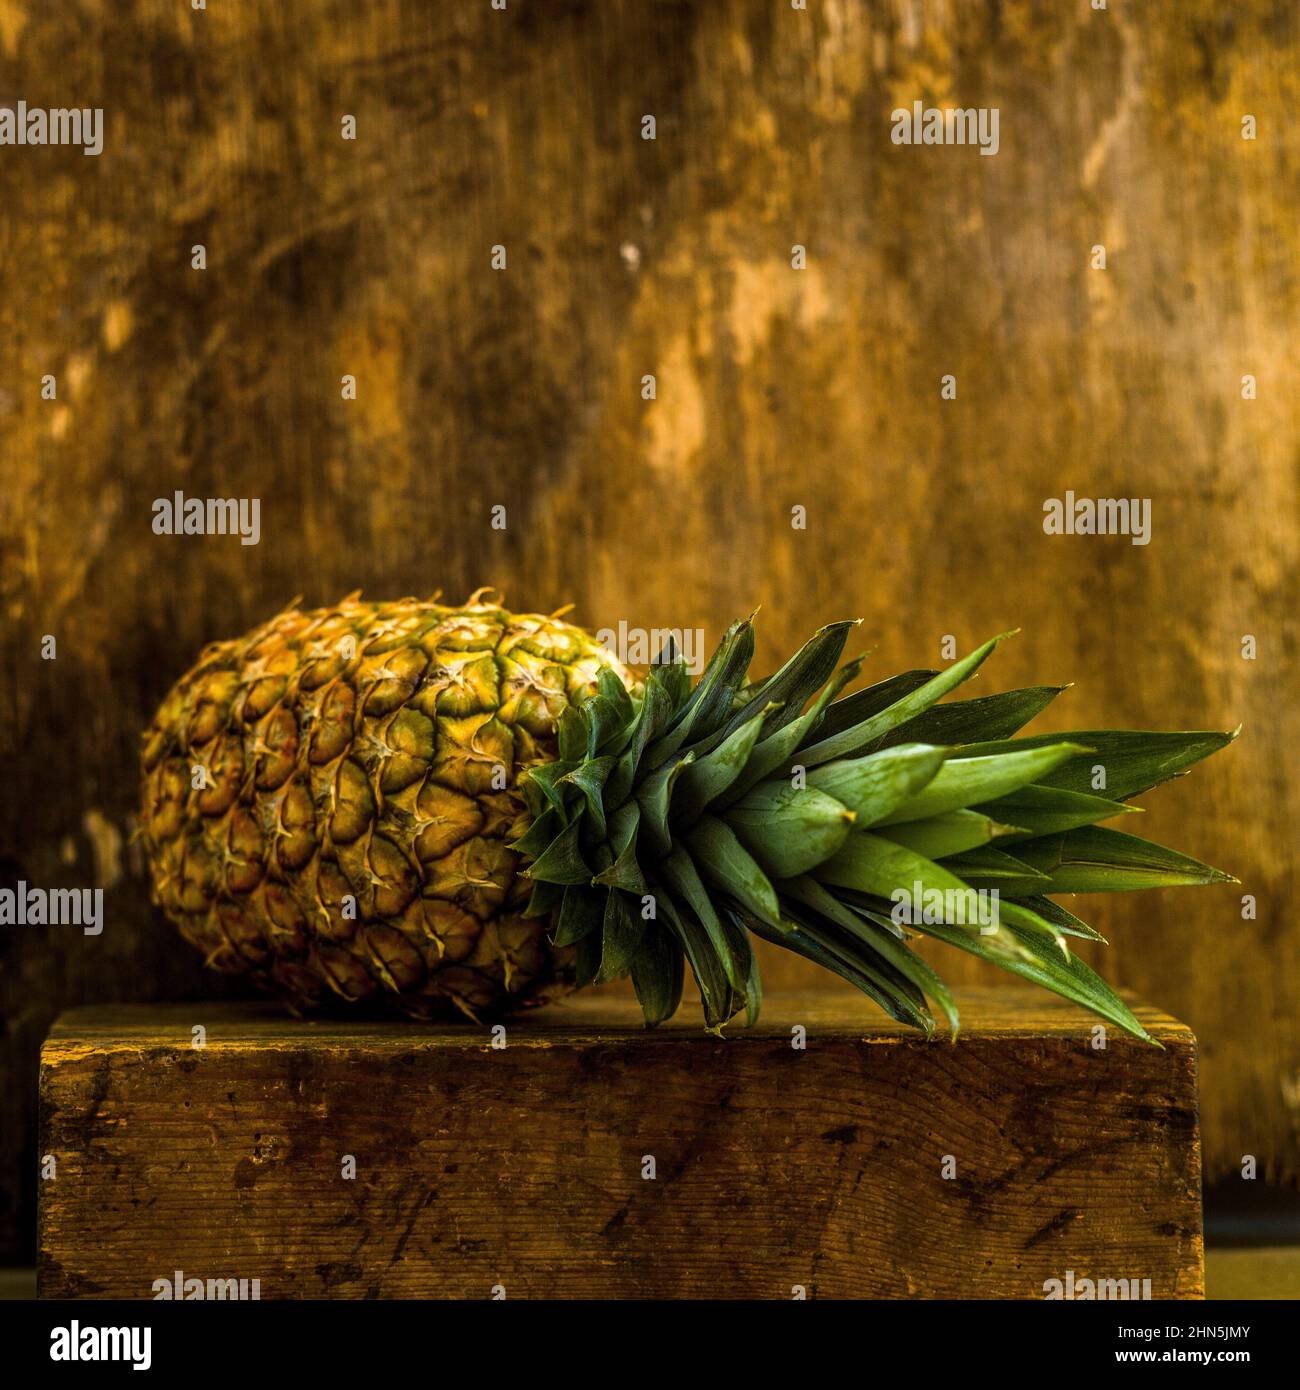 Closeup shot of fresh pineapple on a wooden surface Stock Photo